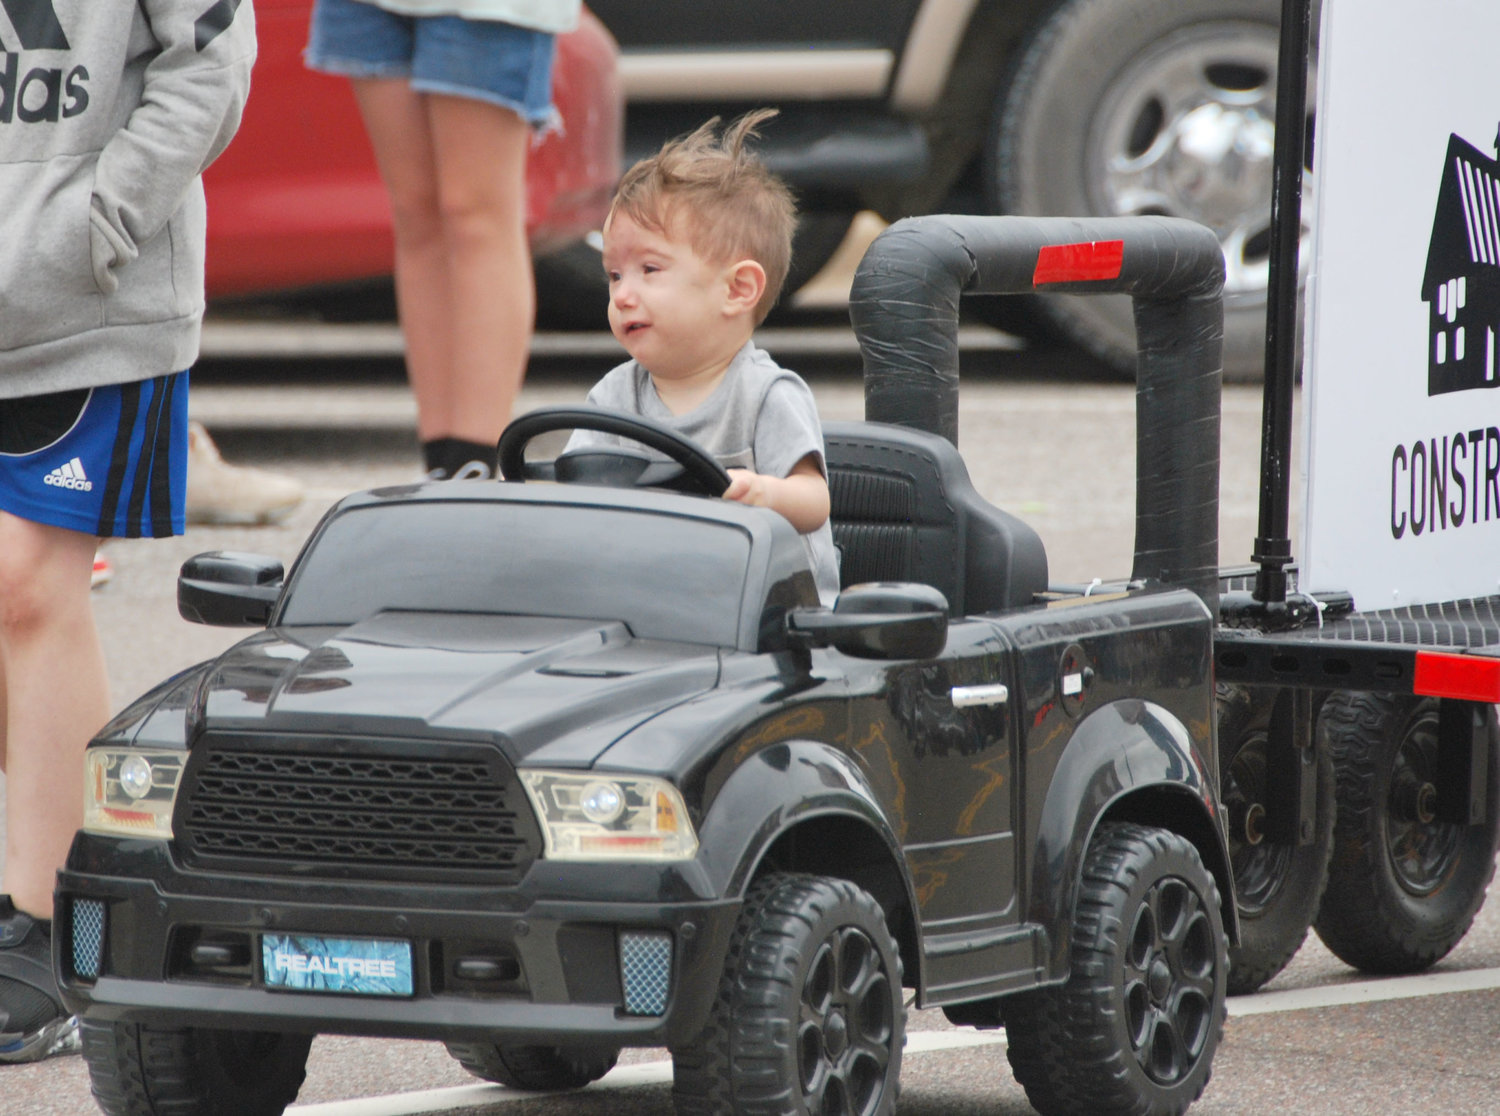 Participants from all different ages helped make the 89er’s Day Parade a success.